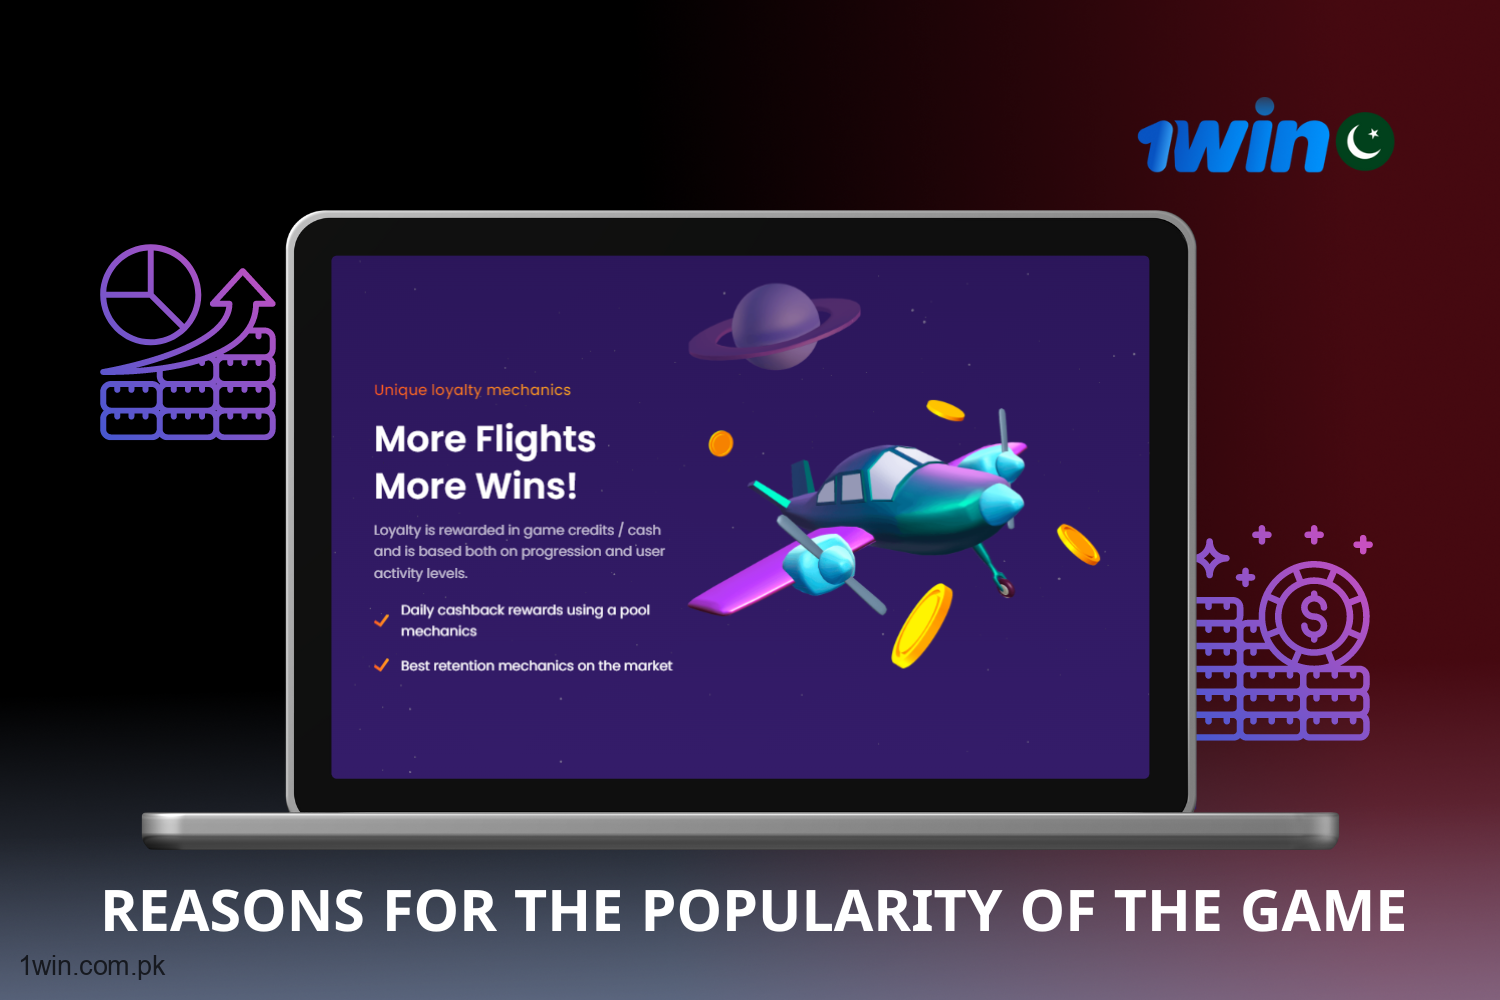 1win Aviatrix is a popular game among players from Pakistan with a simple gameplay and the opportunity to win real money.